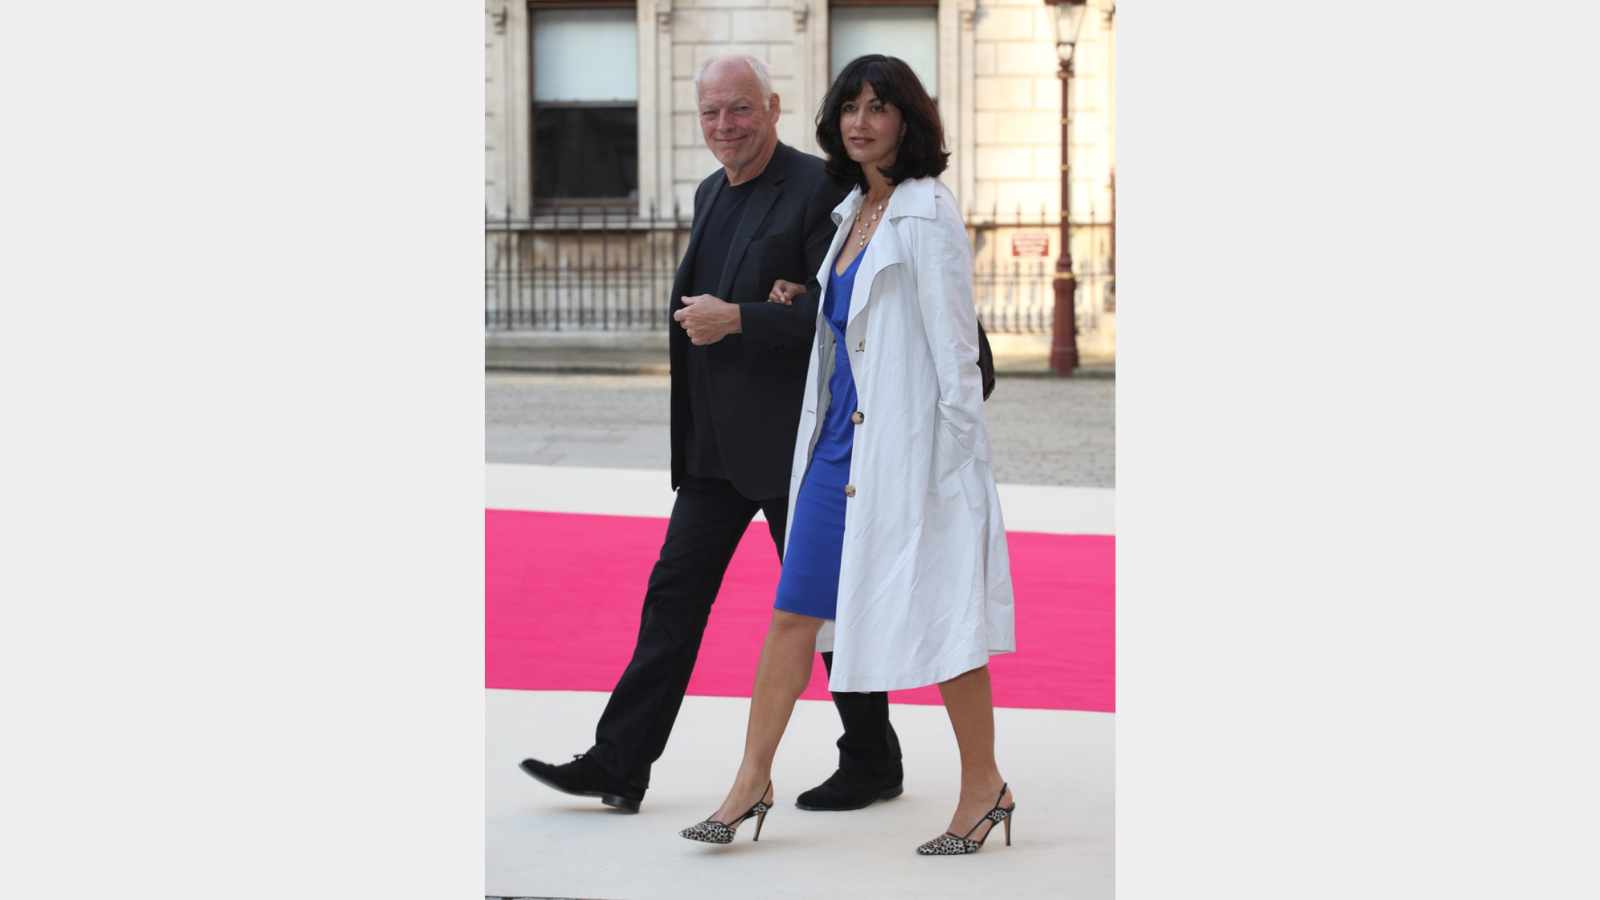 Dave Gilmour and Polly Sampson arriving for the Royal Academy of Arts Summer Exhibition Party, at the Royal Academy of Arts, London. 30/05/2012 Picture by: Alexandra Glen / Featureflash